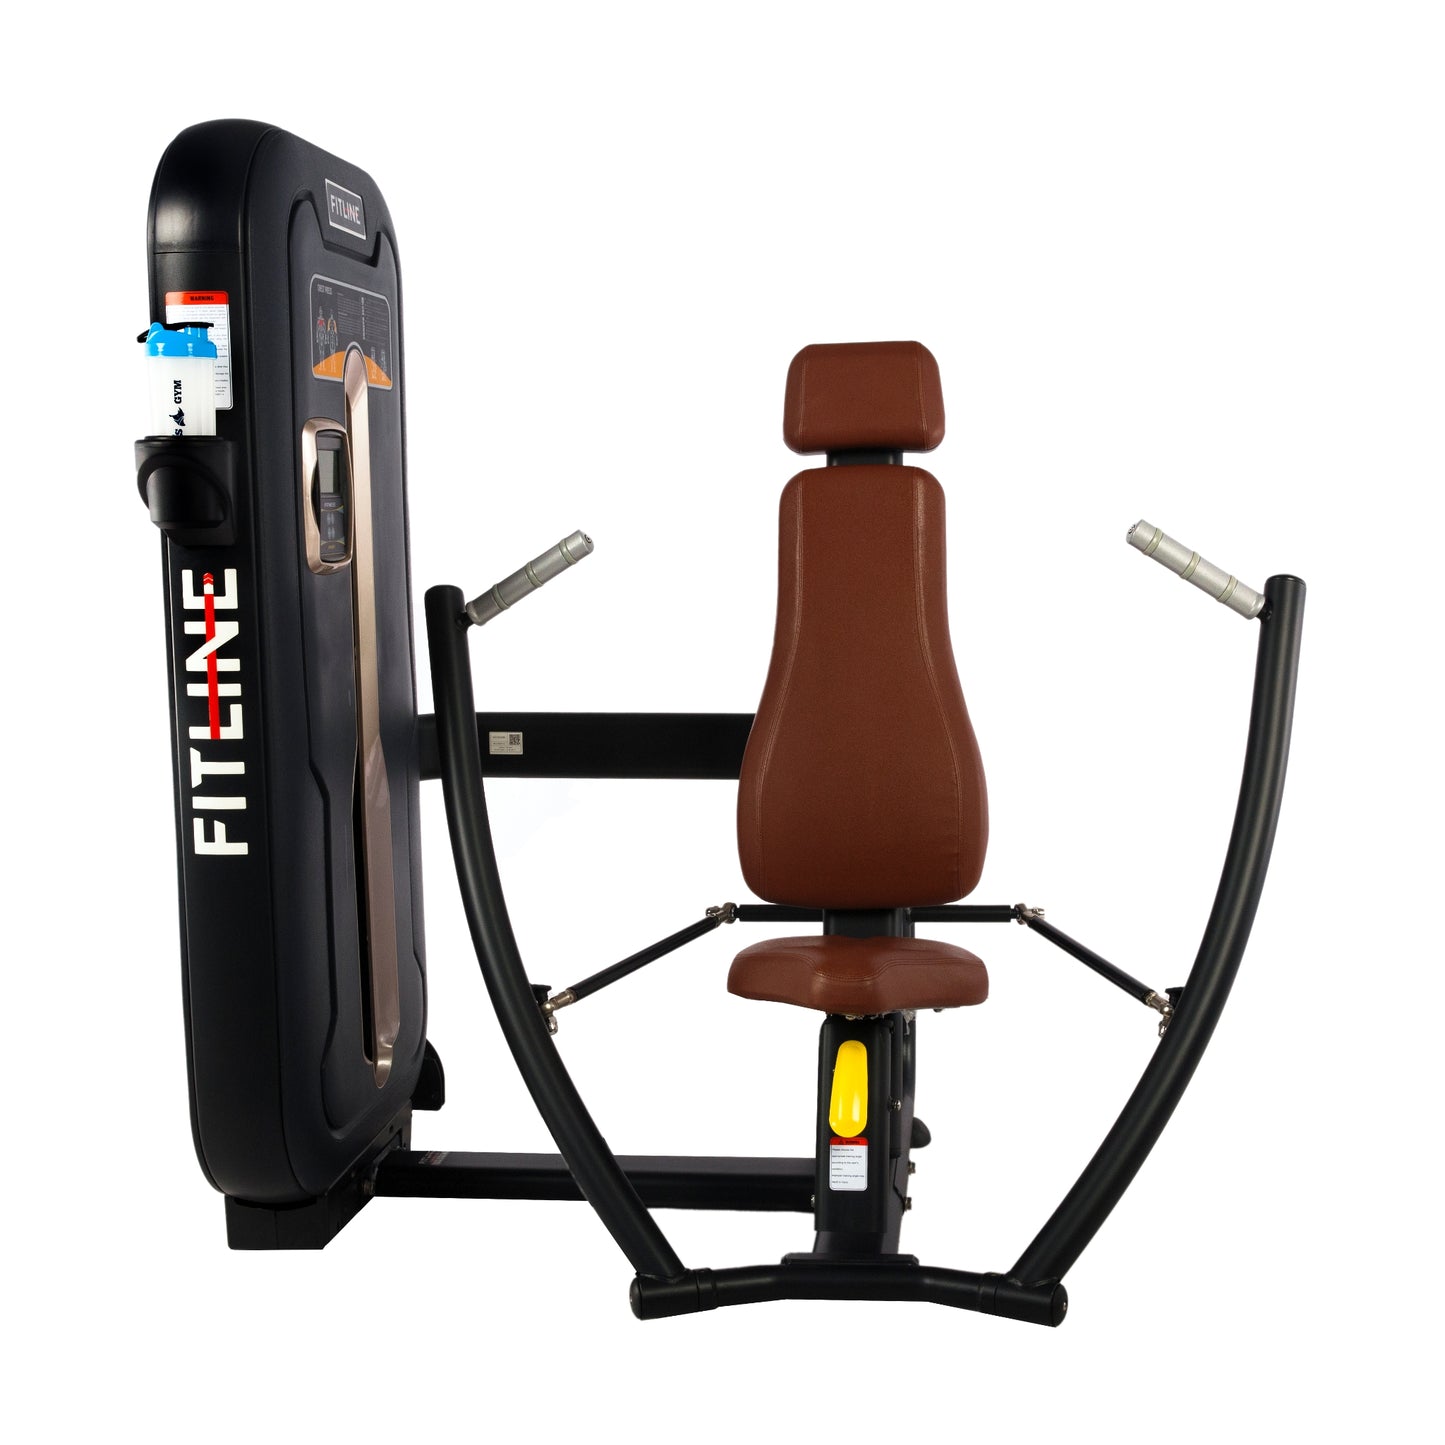 MZM-001 - CHEST PRESS - Fitline India